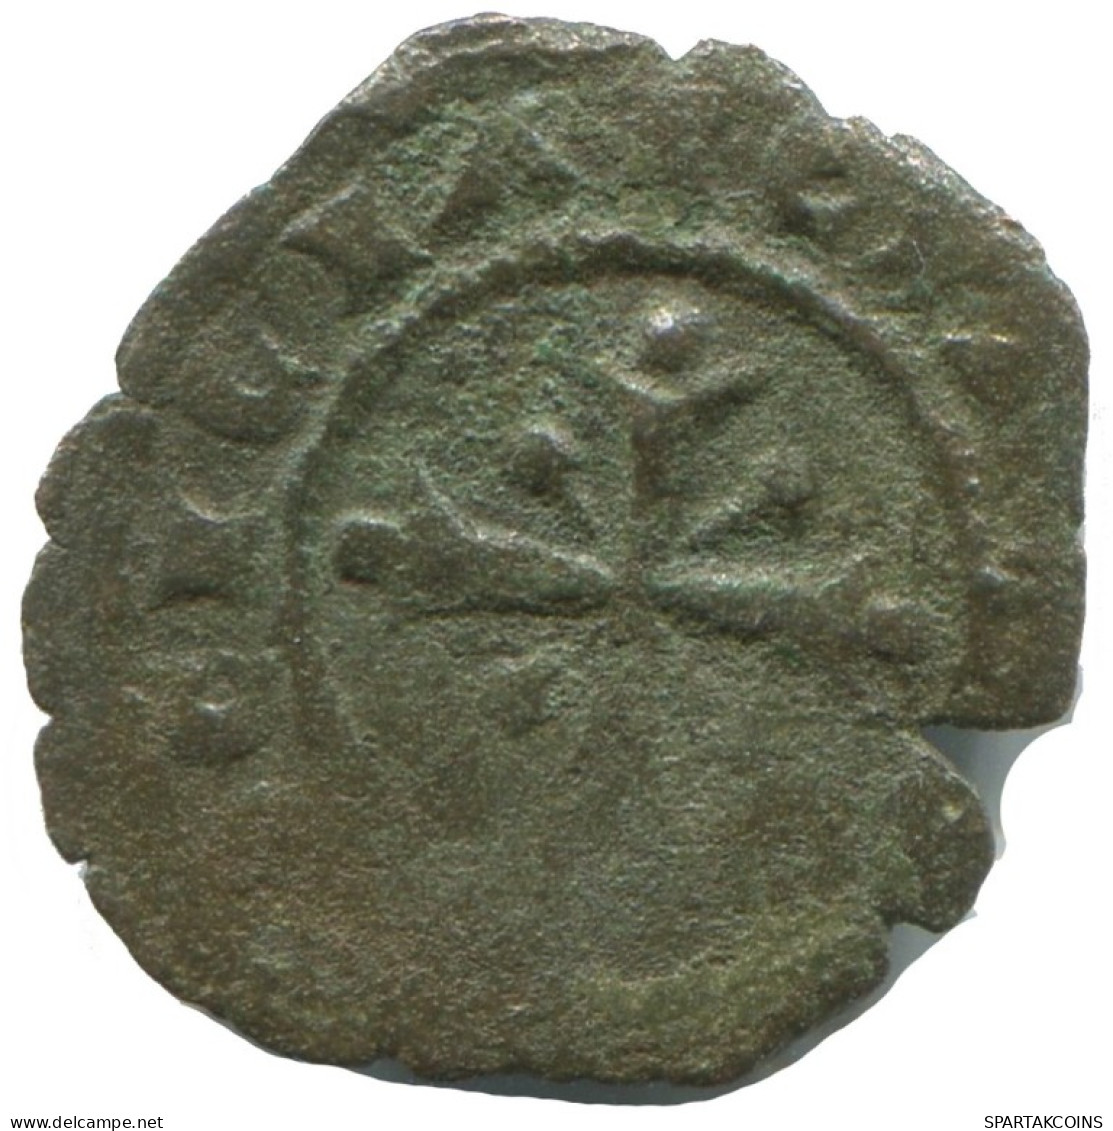 CRUSADER CROSS Authentic Original MEDIEVAL EUROPEAN Coin 0.6g/17mm #AC313.8.D.A - Other - Europe